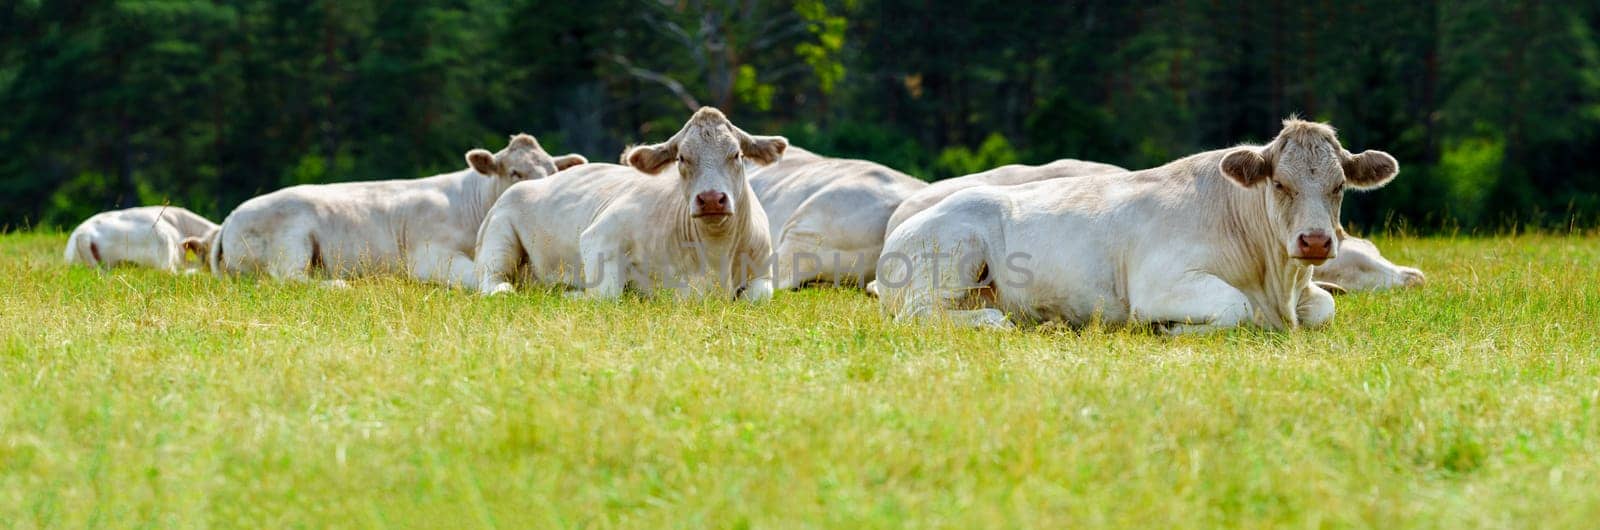 Herd of white French meat cows peacefully resting and grazing on lush green grass under the warm sun of a beautiful summer day in the countryside